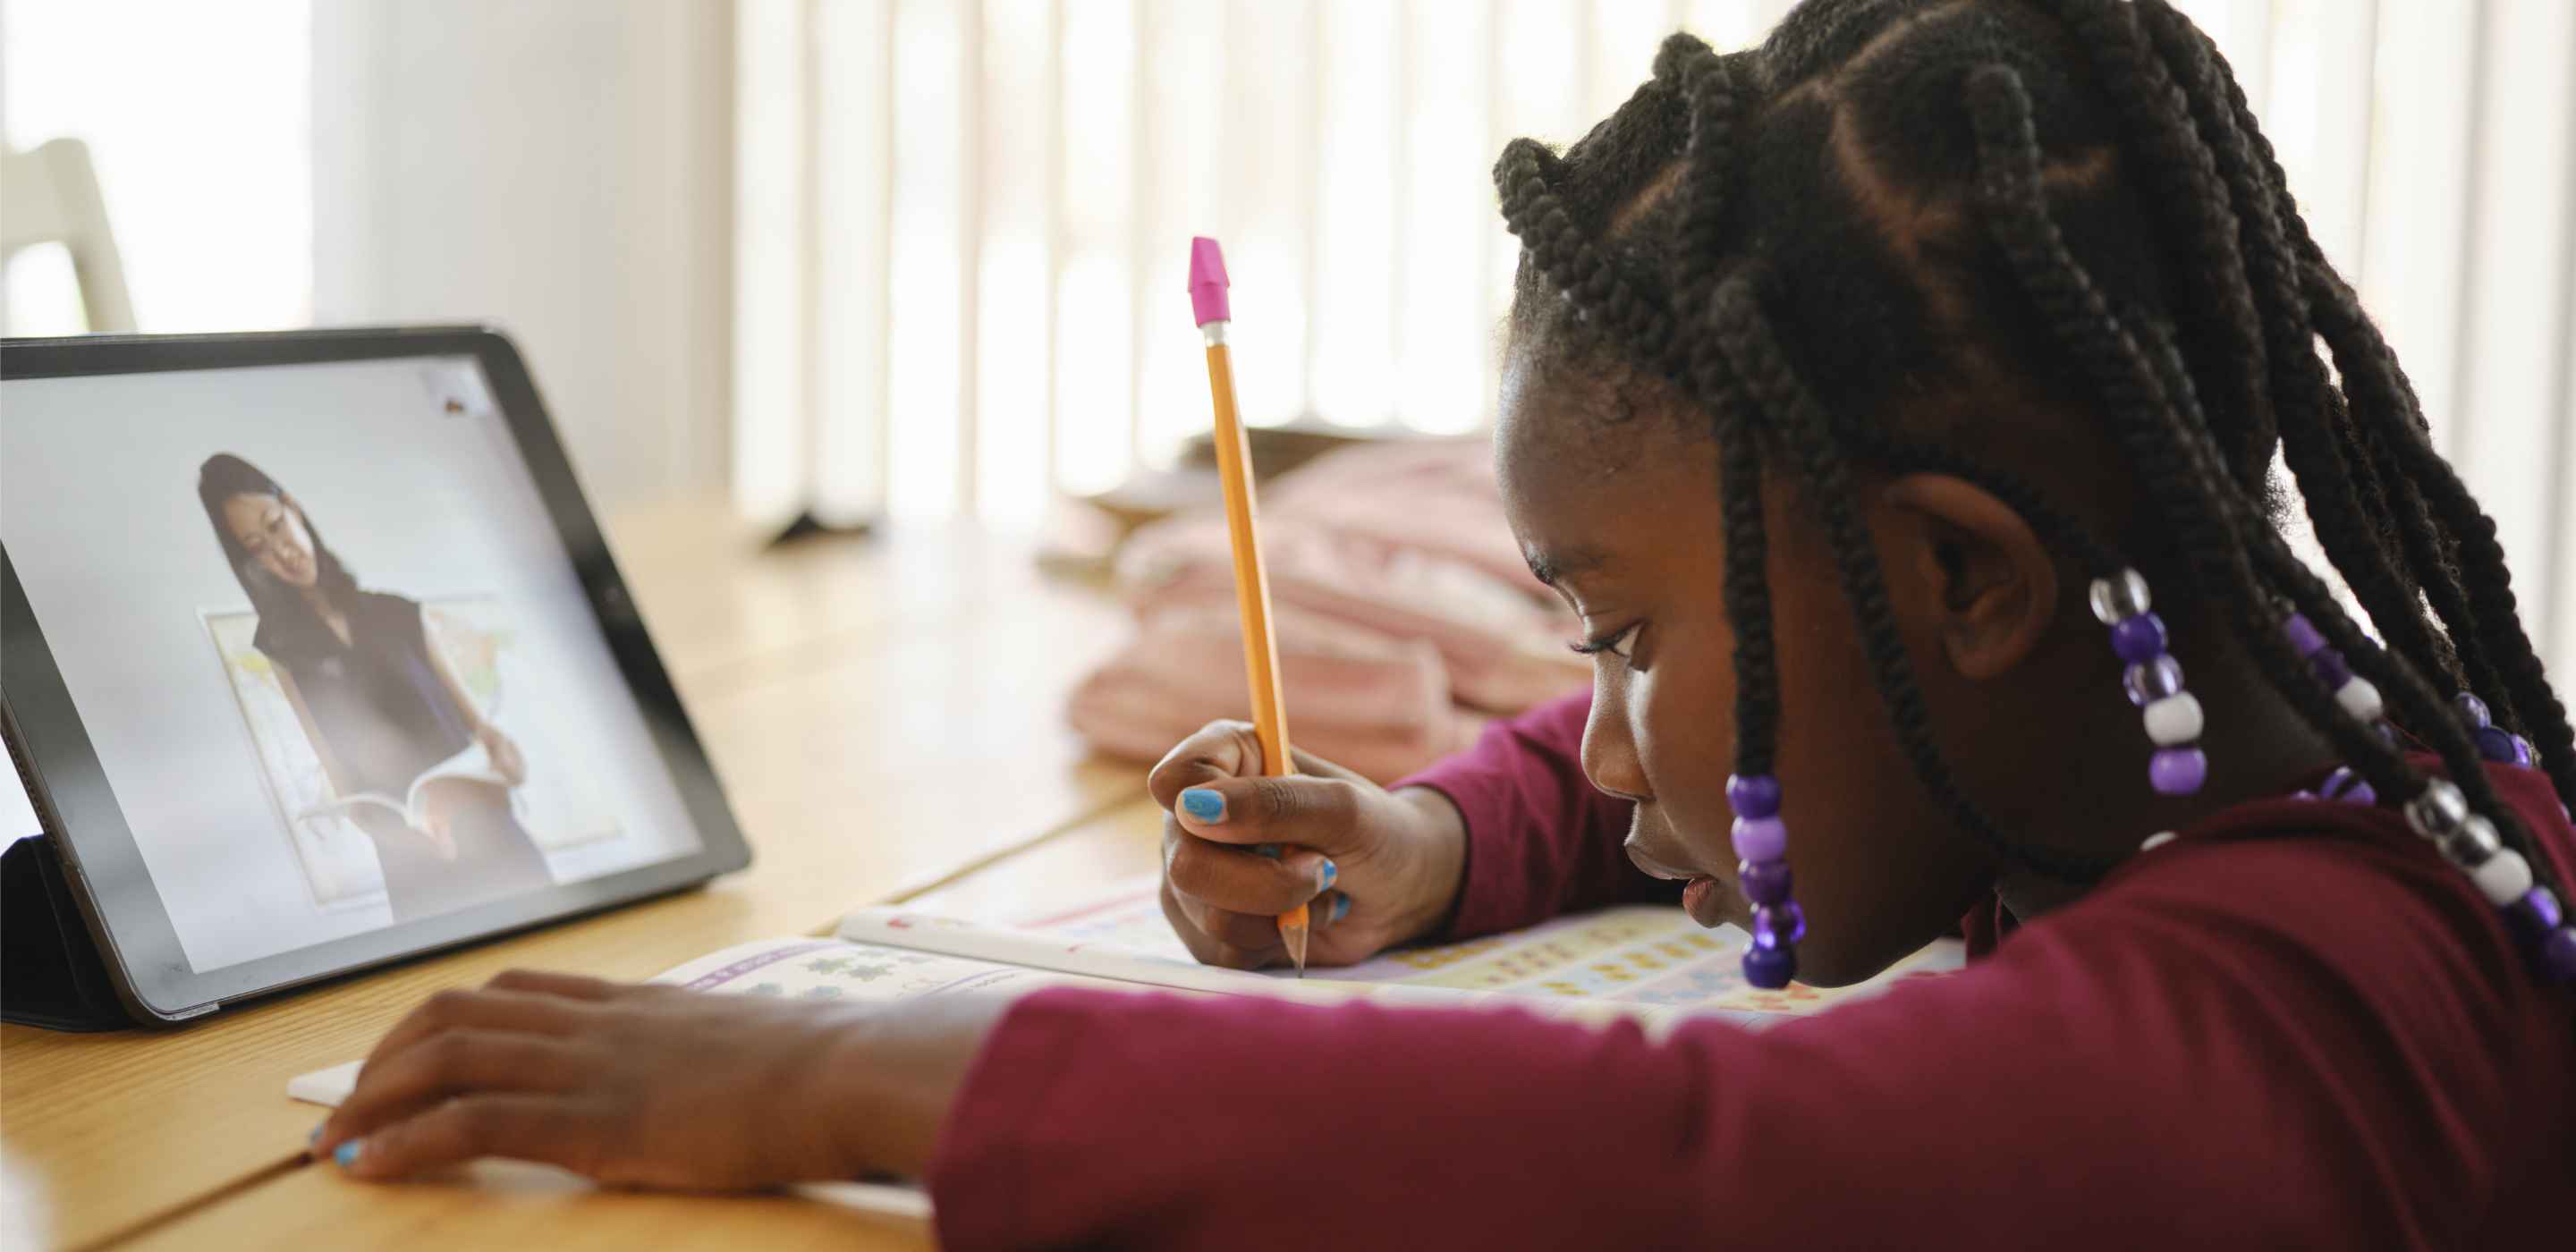 child sitting and writing at desk with active tablet device facing her  